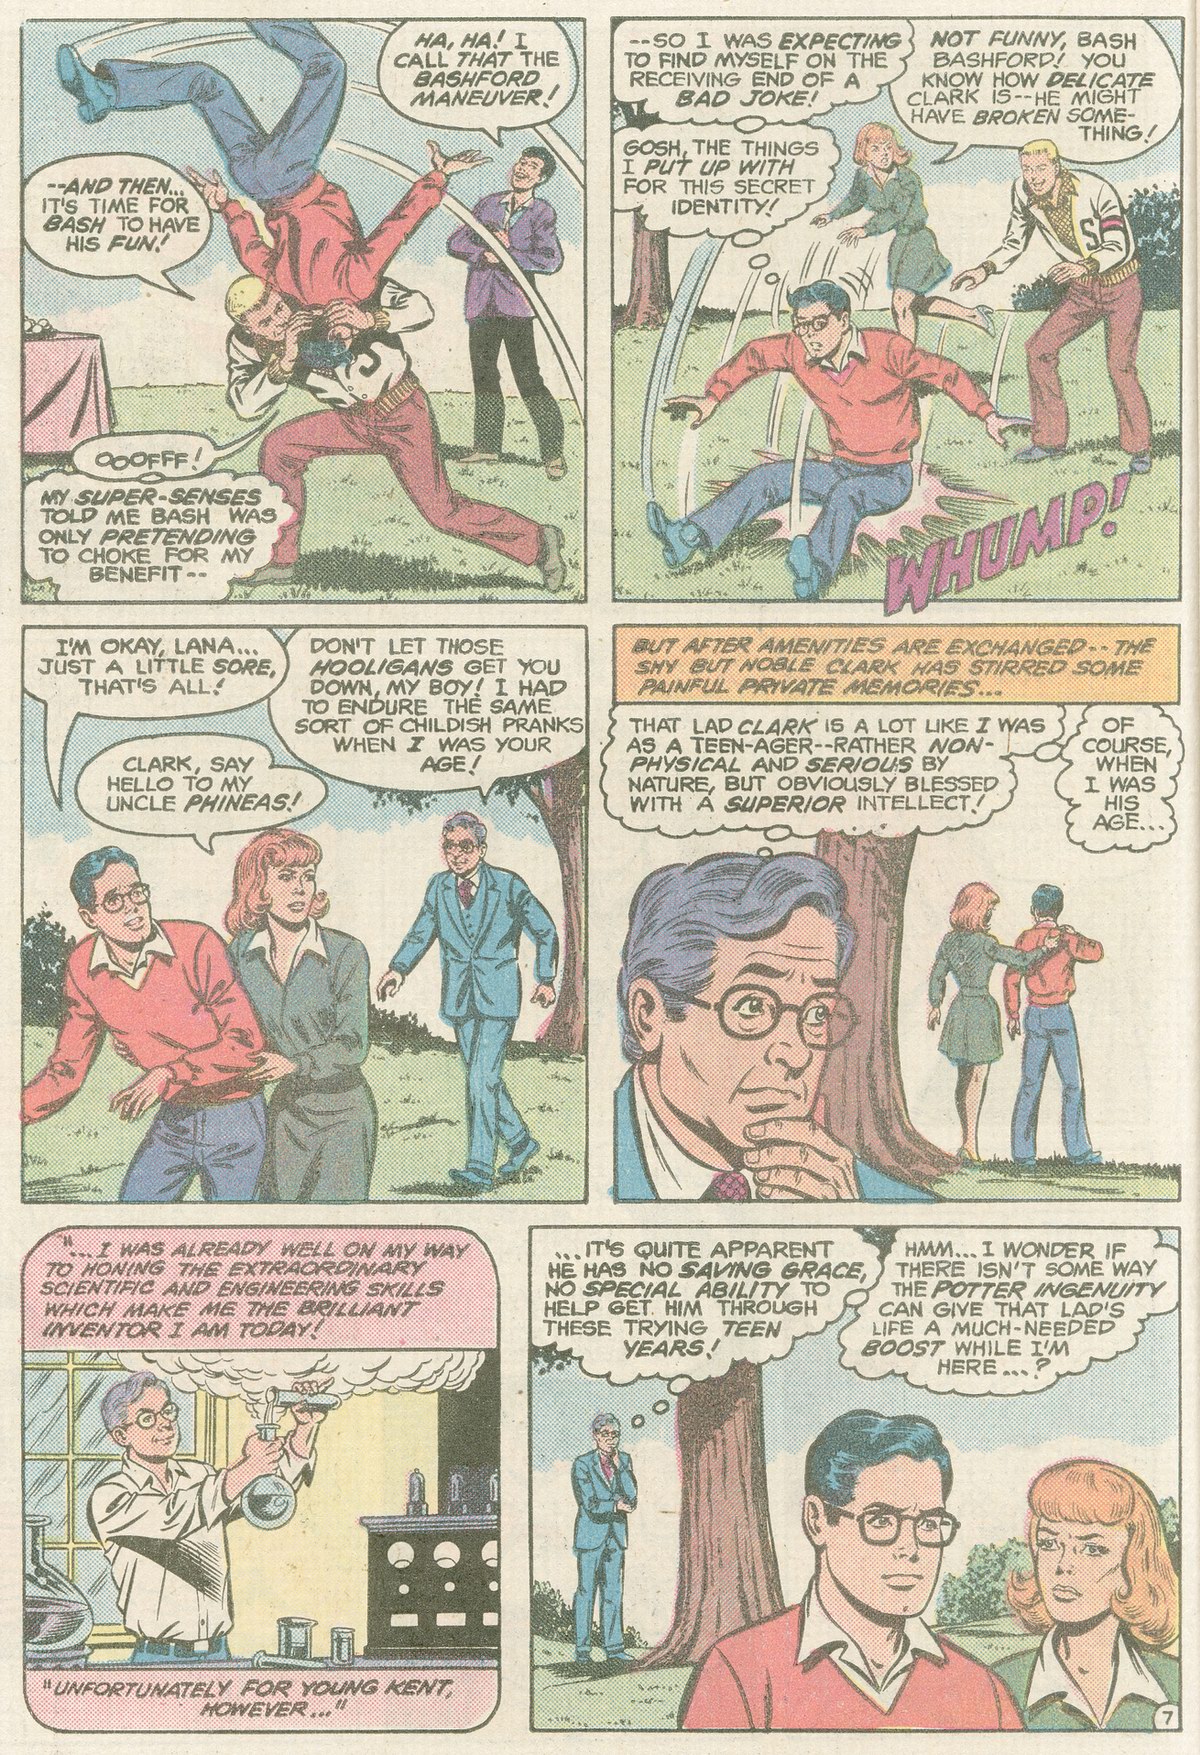 The New Adventures of Superboy 26 Page 7